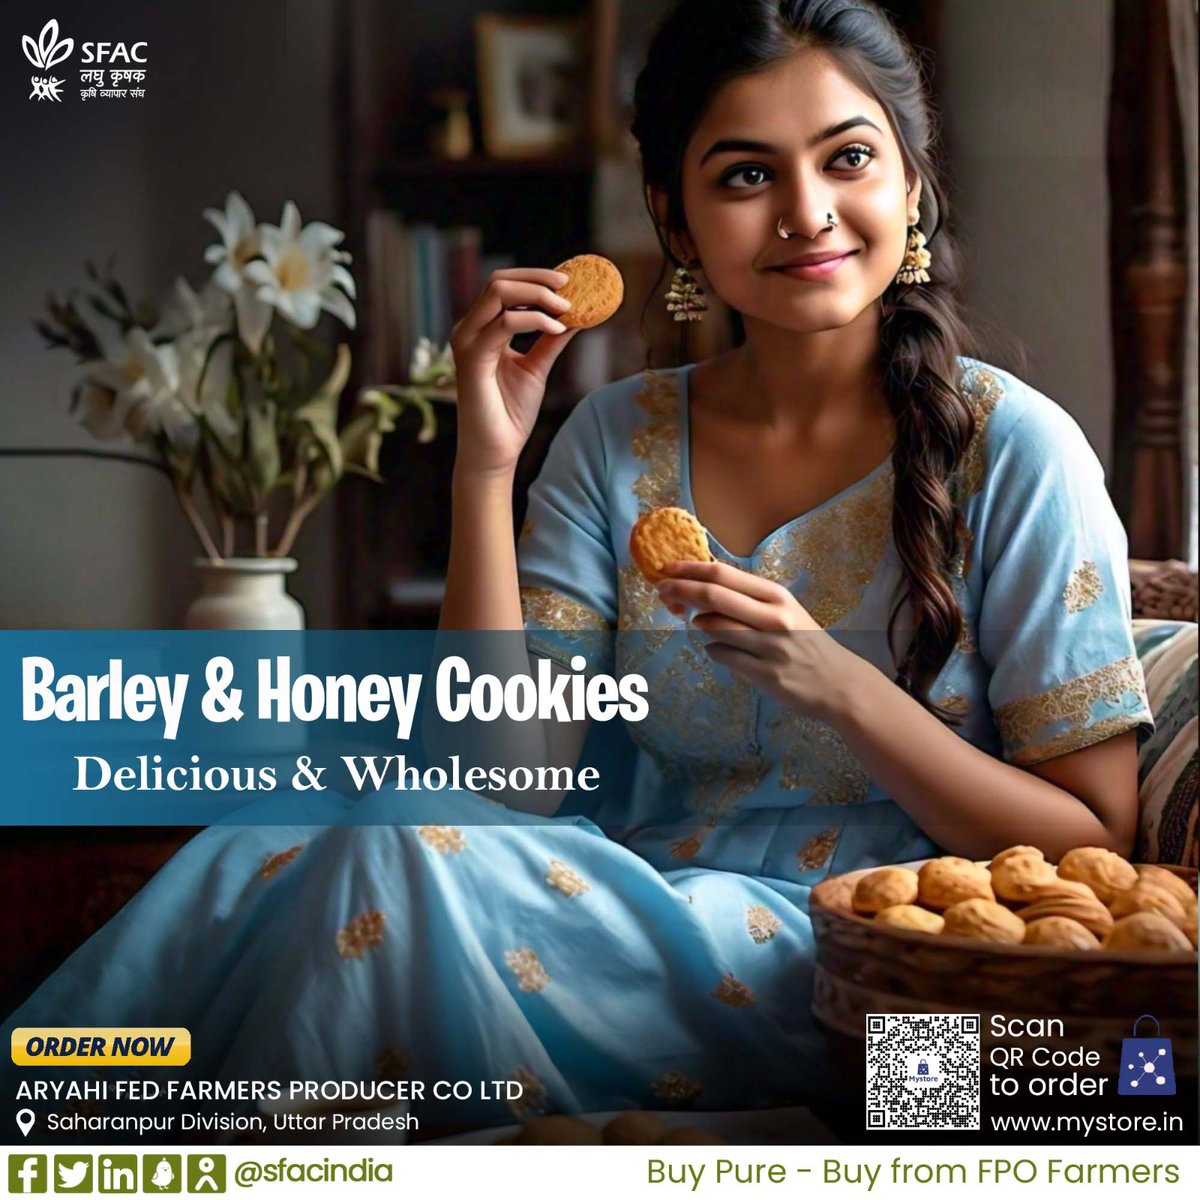 This delicious cookie made from wholesome barley millet flour & pure honey is an ideal snack for weight loss. Buy straight from FPO farmers 👇 mystore.in/en/product/coo… 😋 #healthychoices #healthyeating #healthyhabits #tastyrecipes